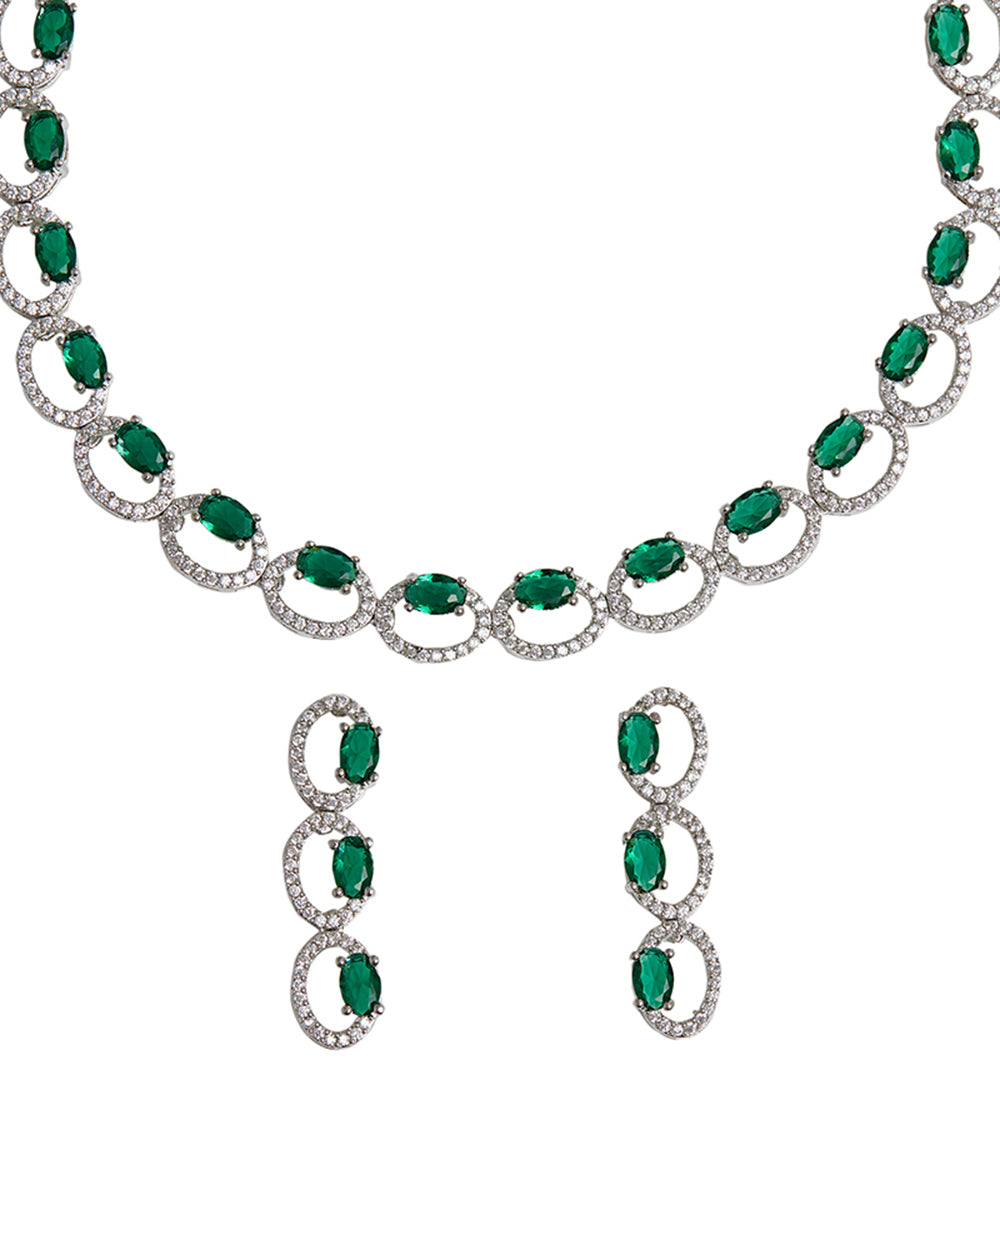 Women's Elegance Collection Necklace With Green And Silver Gems - Voylla